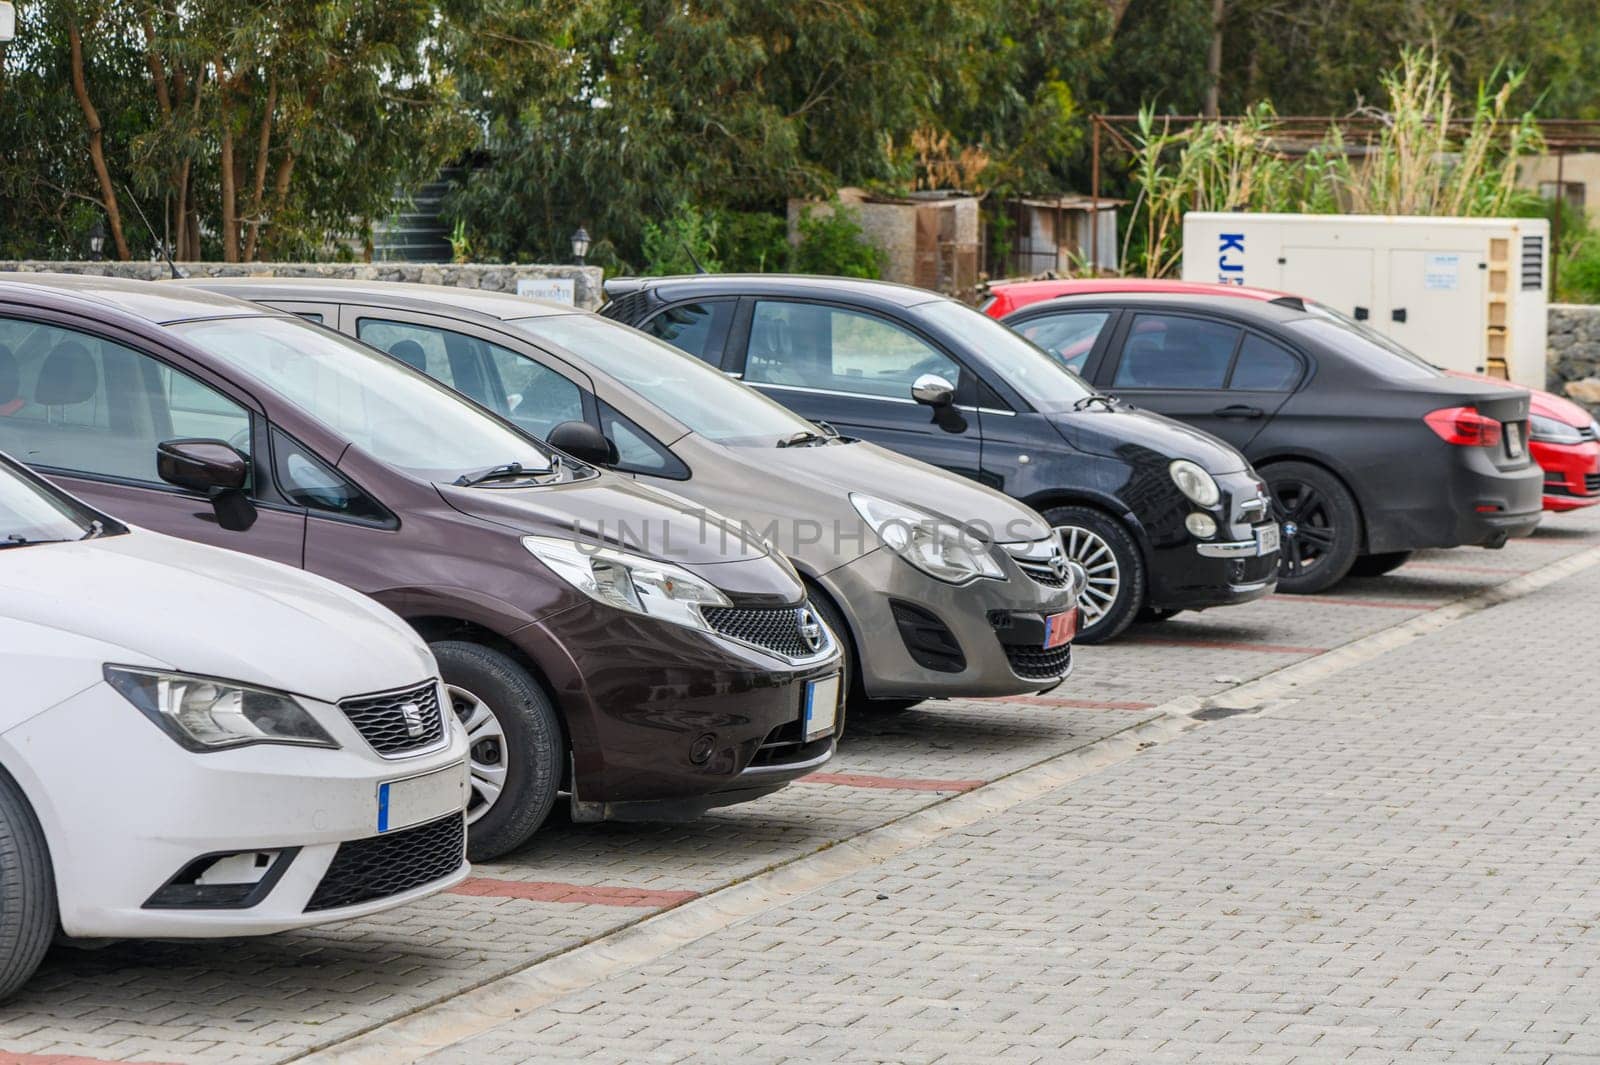 Cars parked in front of a modern residential complex in Cyprus